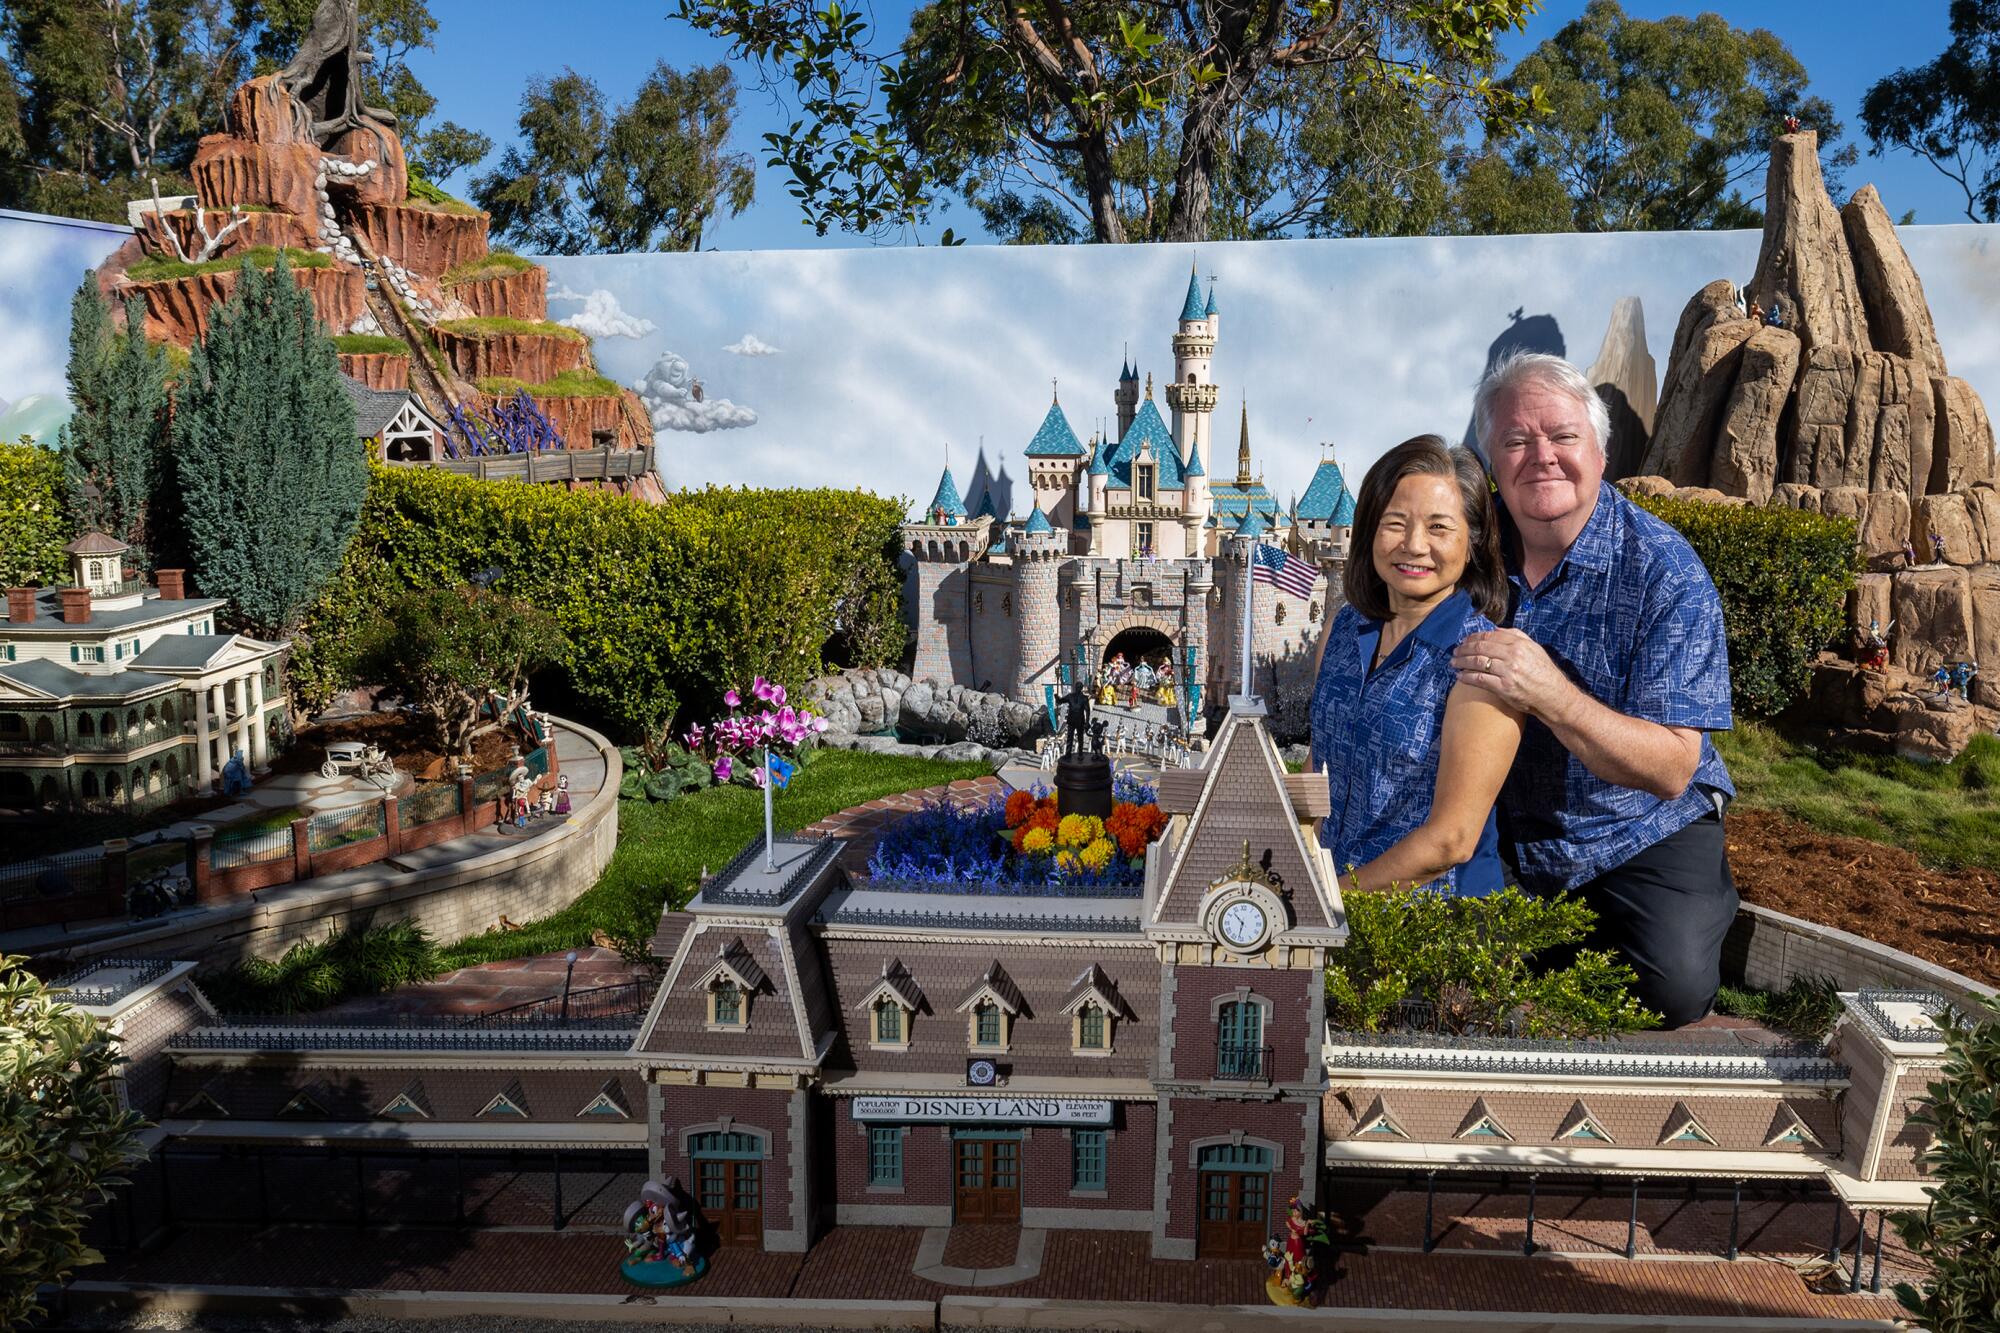 David and Frances Sheegog pose with their mini-Disneyland in their Anaheim Hills home.